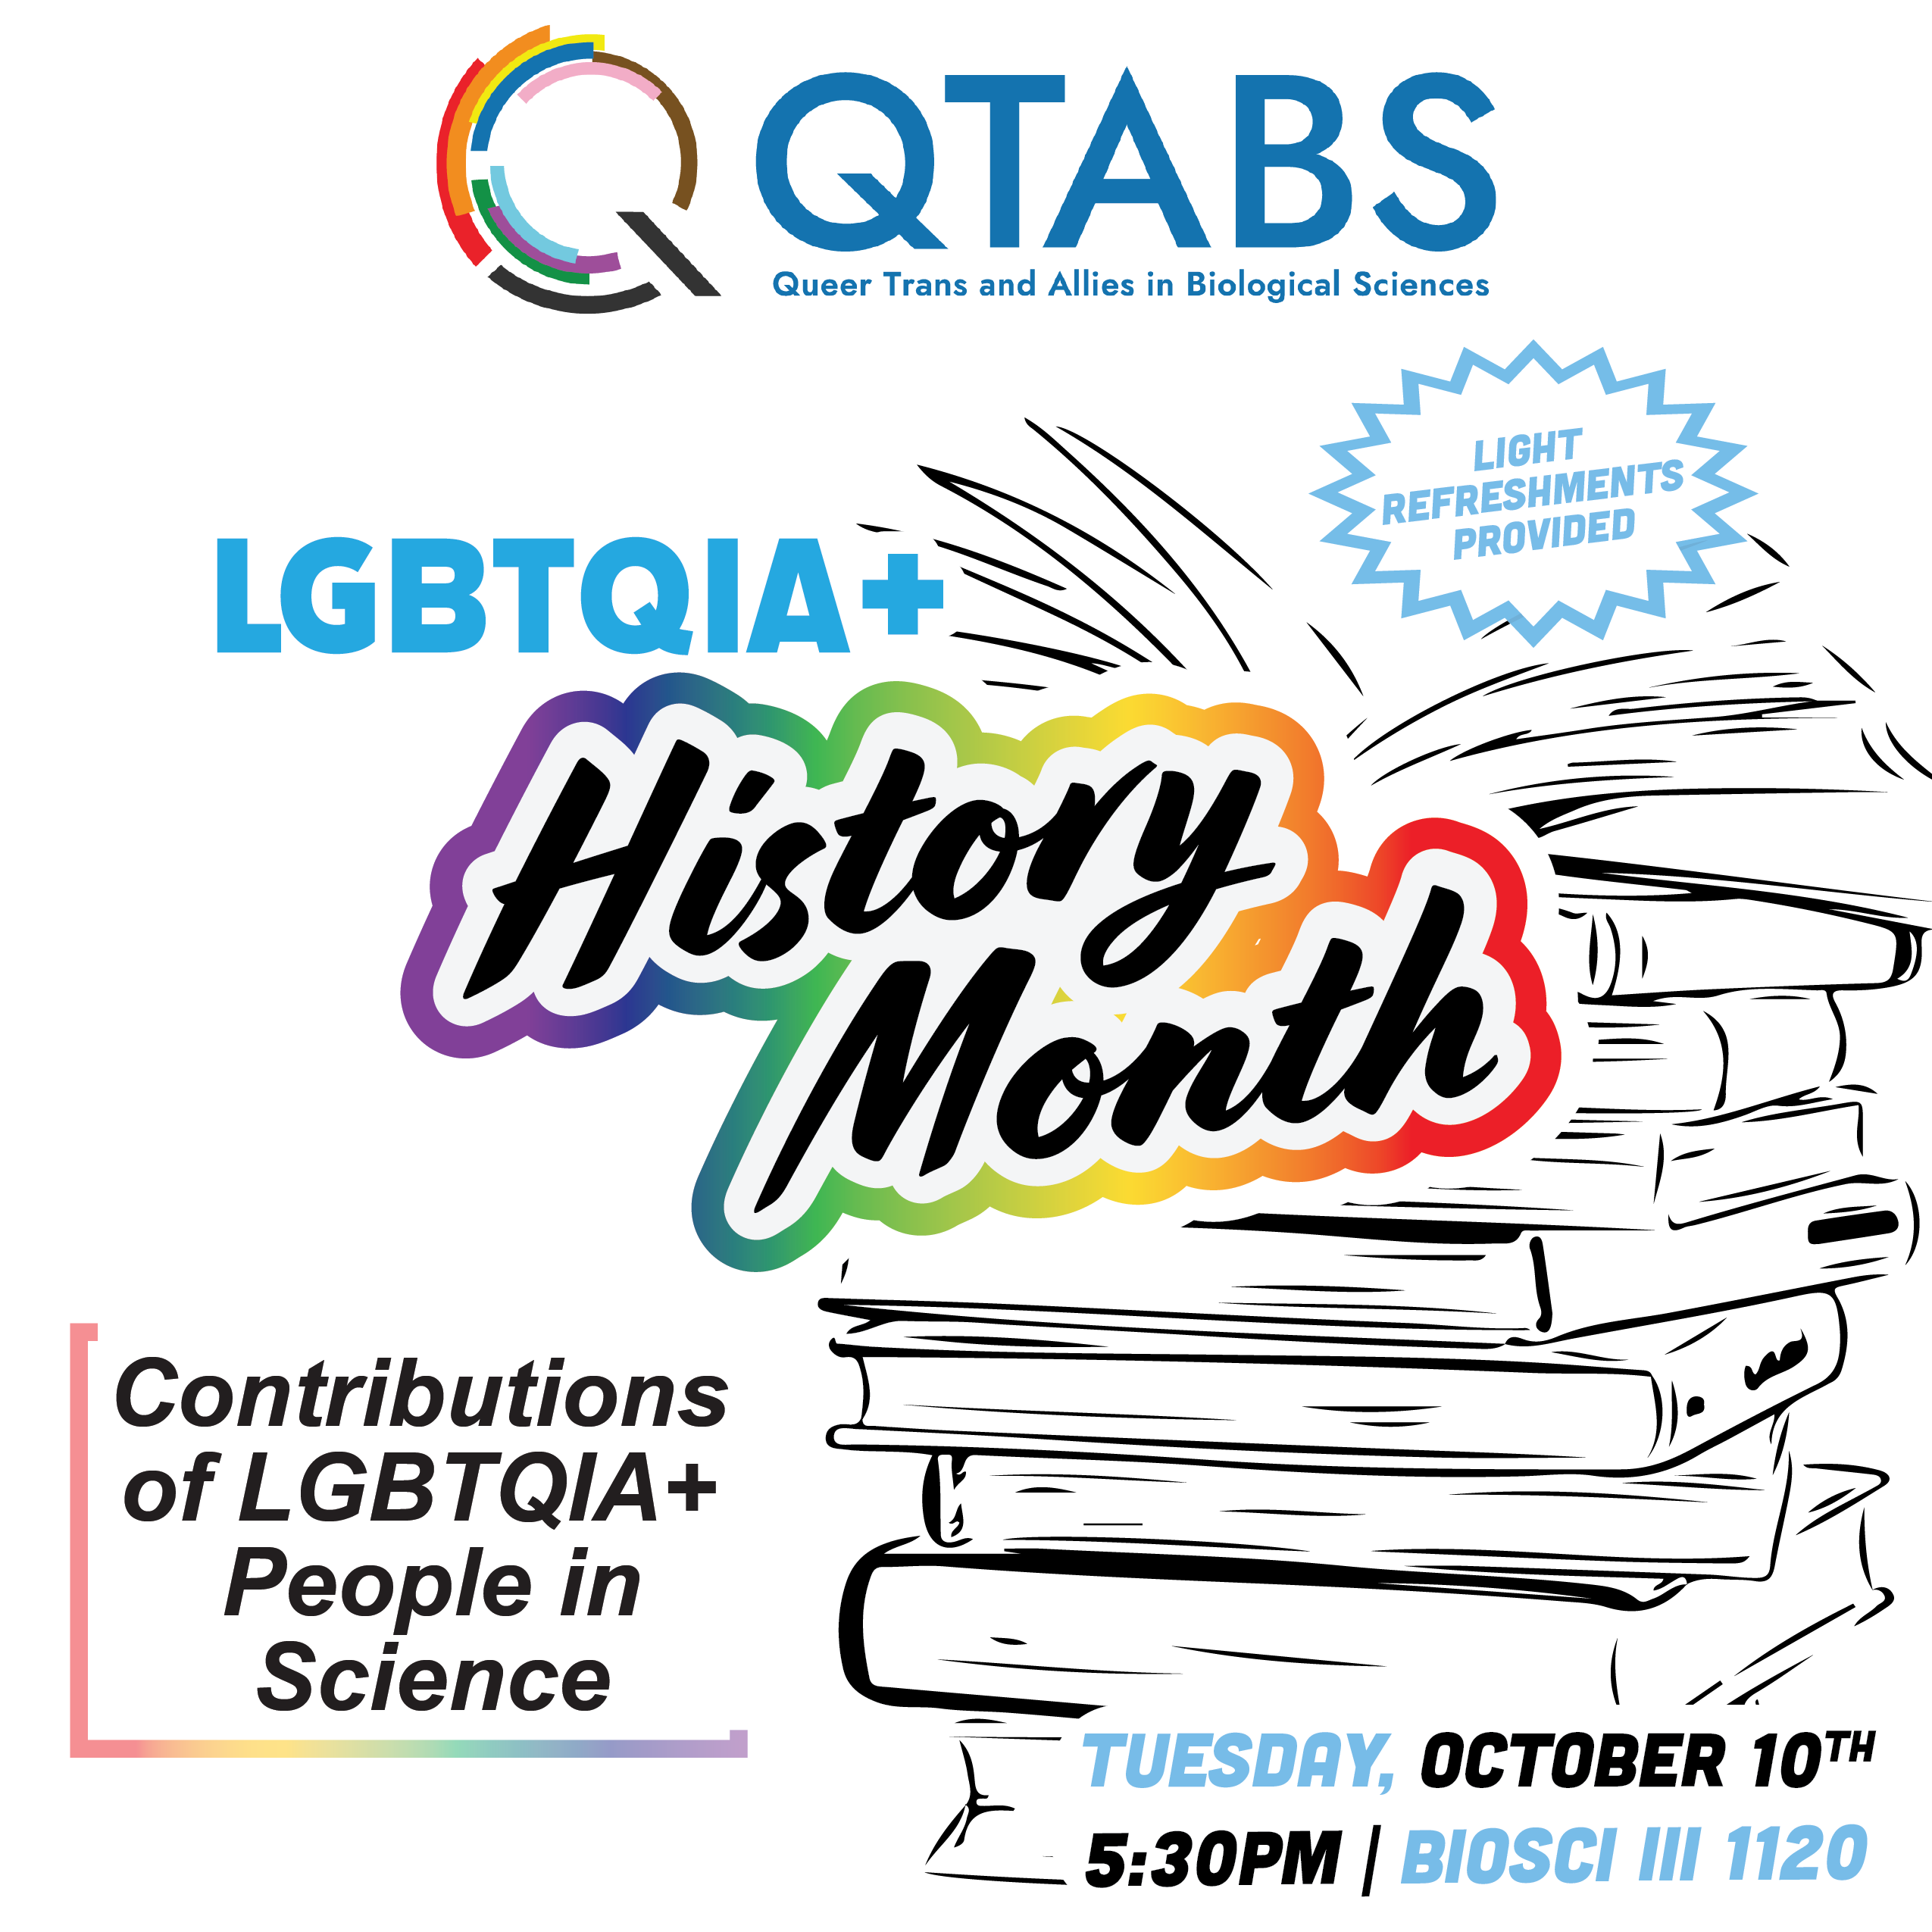 Queer Trans and Allies in Biological Sciences (QTABS) invites you to join us on Tuesday, October 10 in Biological Sciences 3, Room 1120 at 5:30PM as we highlight significant leaders in science who identify as LGBTQIA+. Light refreshments will be provided!